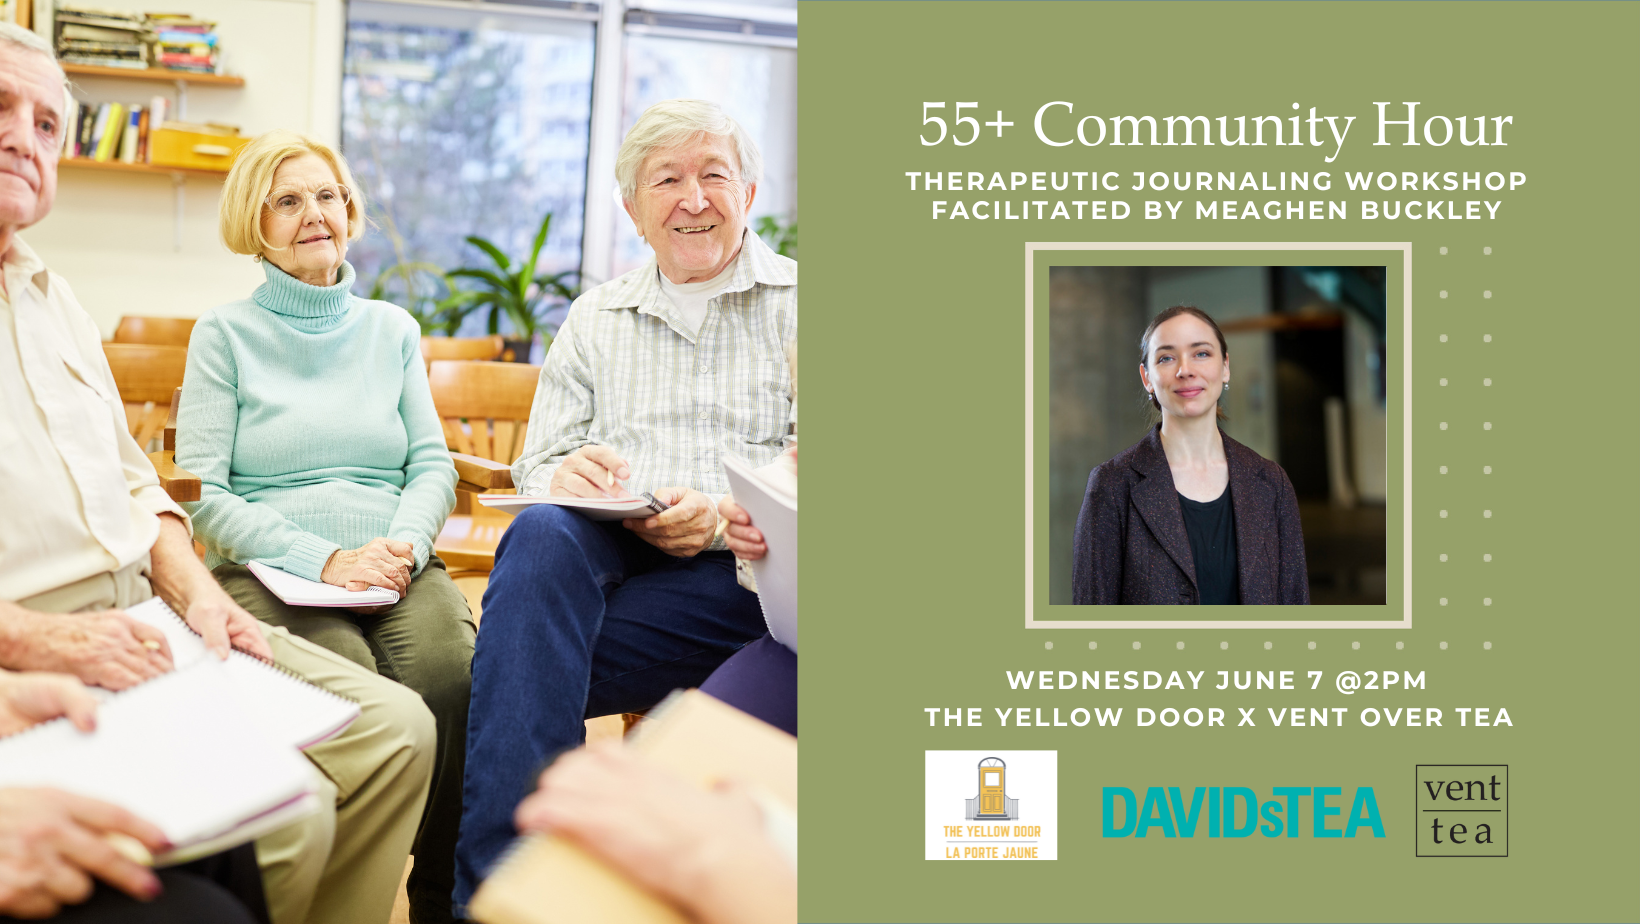 55+ Community Hour: A Therapeutic Journaling Workshop